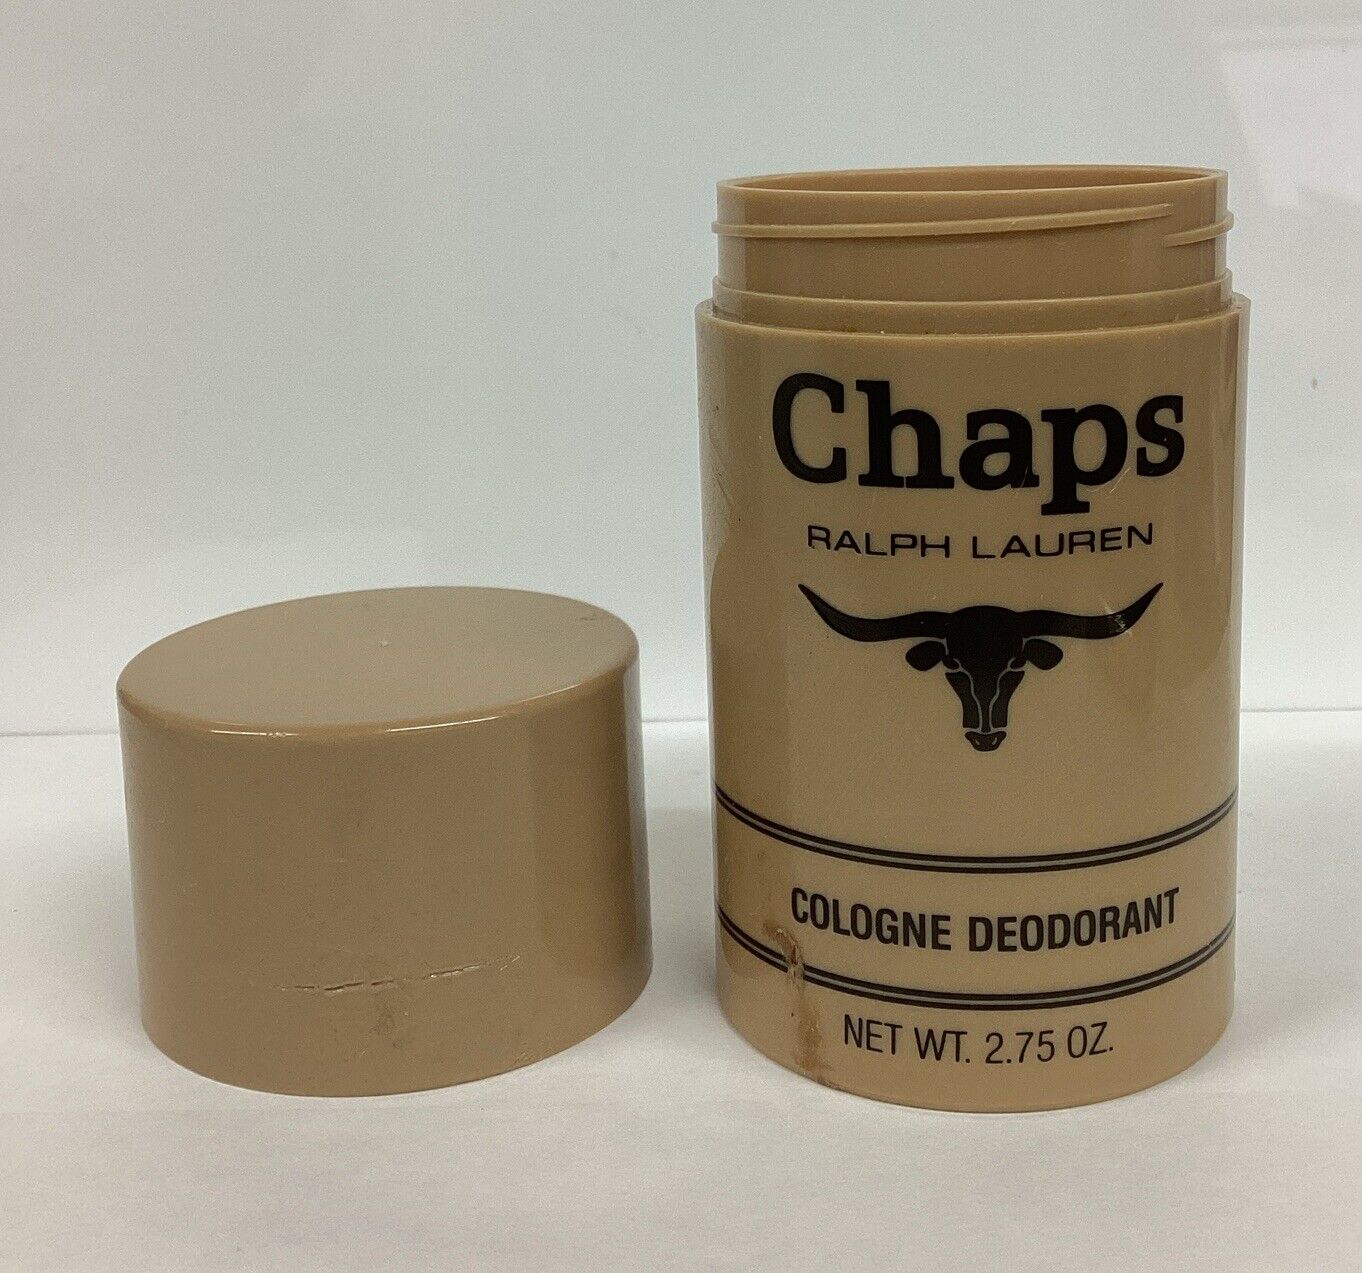 Chaps by Ralph Lauren Cologne Deodorant 2.75oz CONDITION AS PICTURED